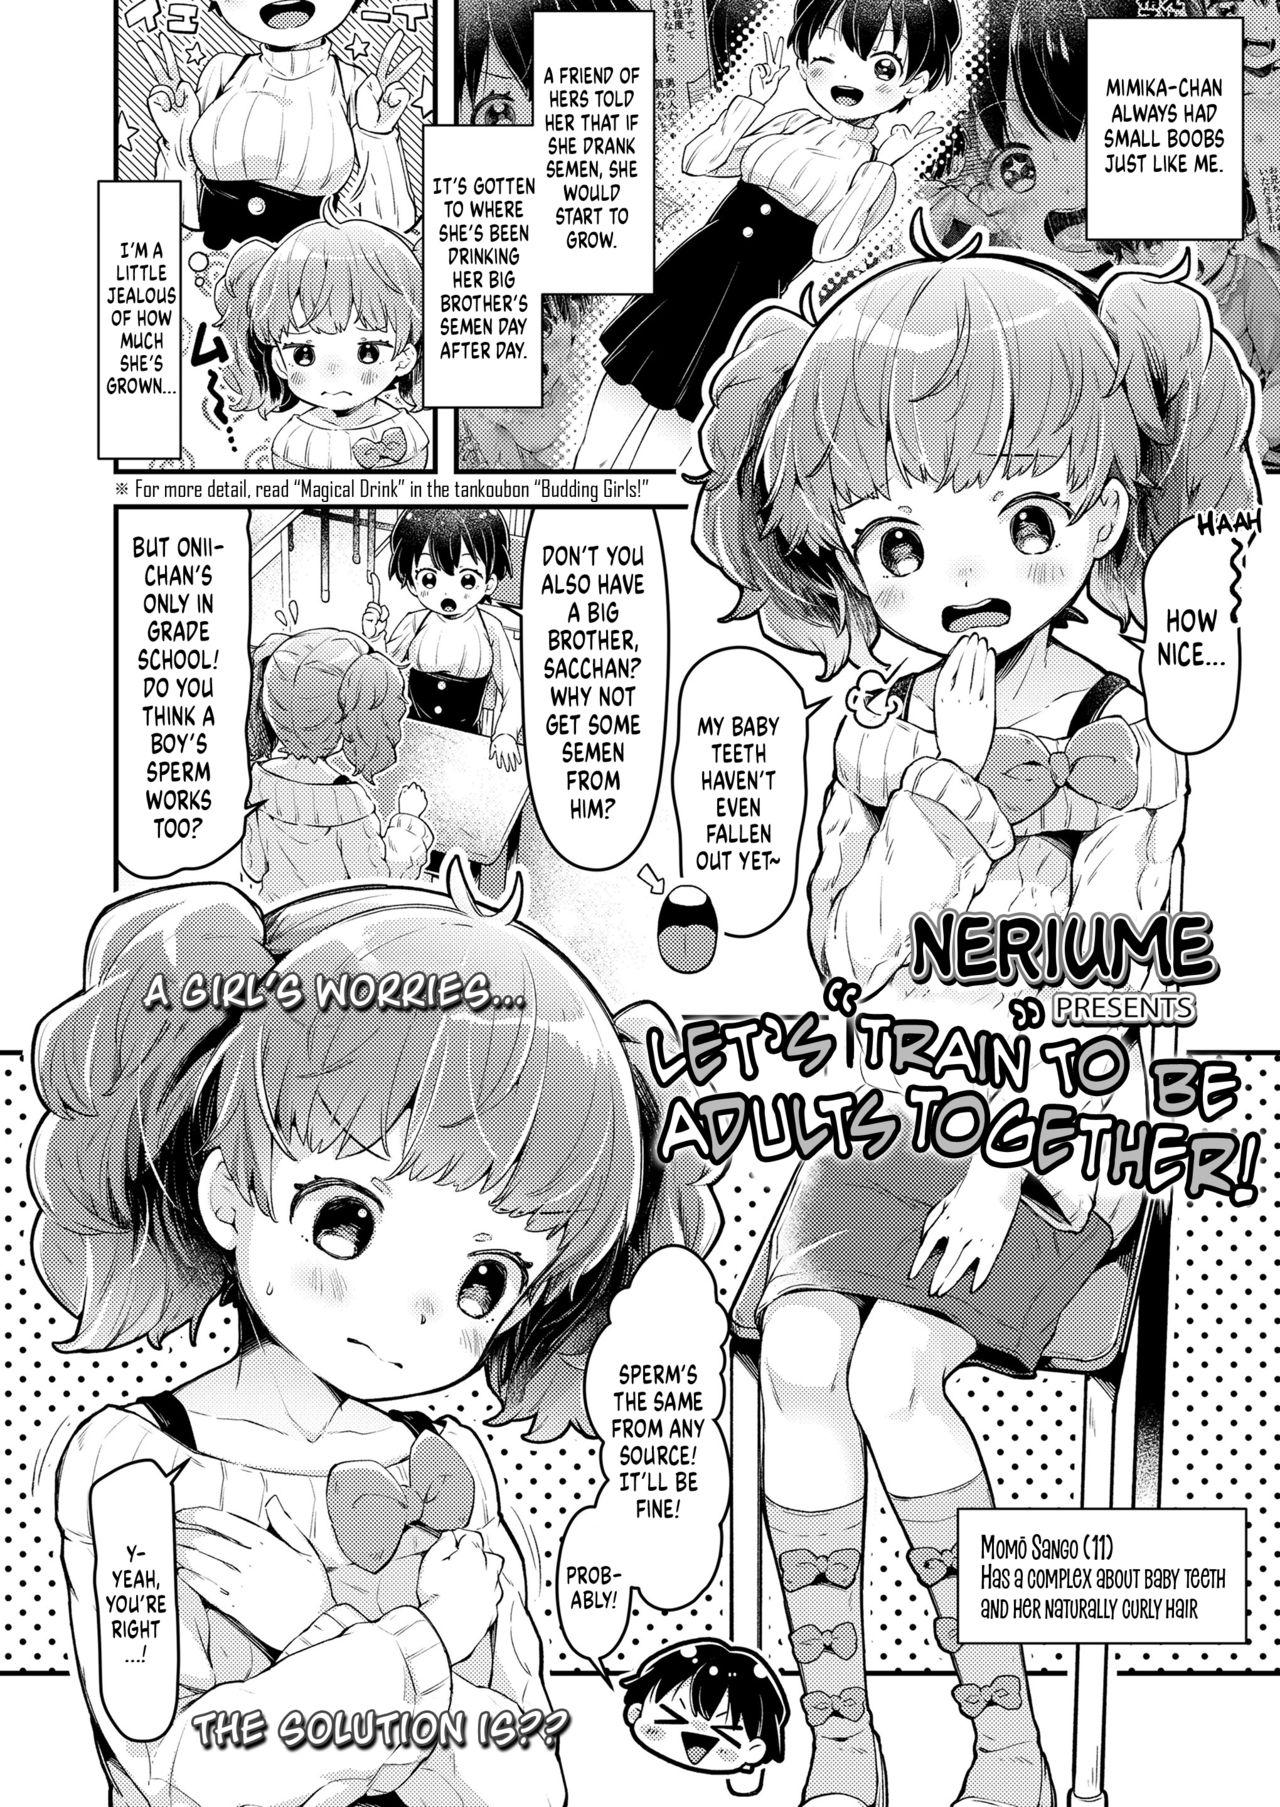 Gorgeous Issho ni Otona Training! | Let's Train to be Adults Together! 8teen - Page 2